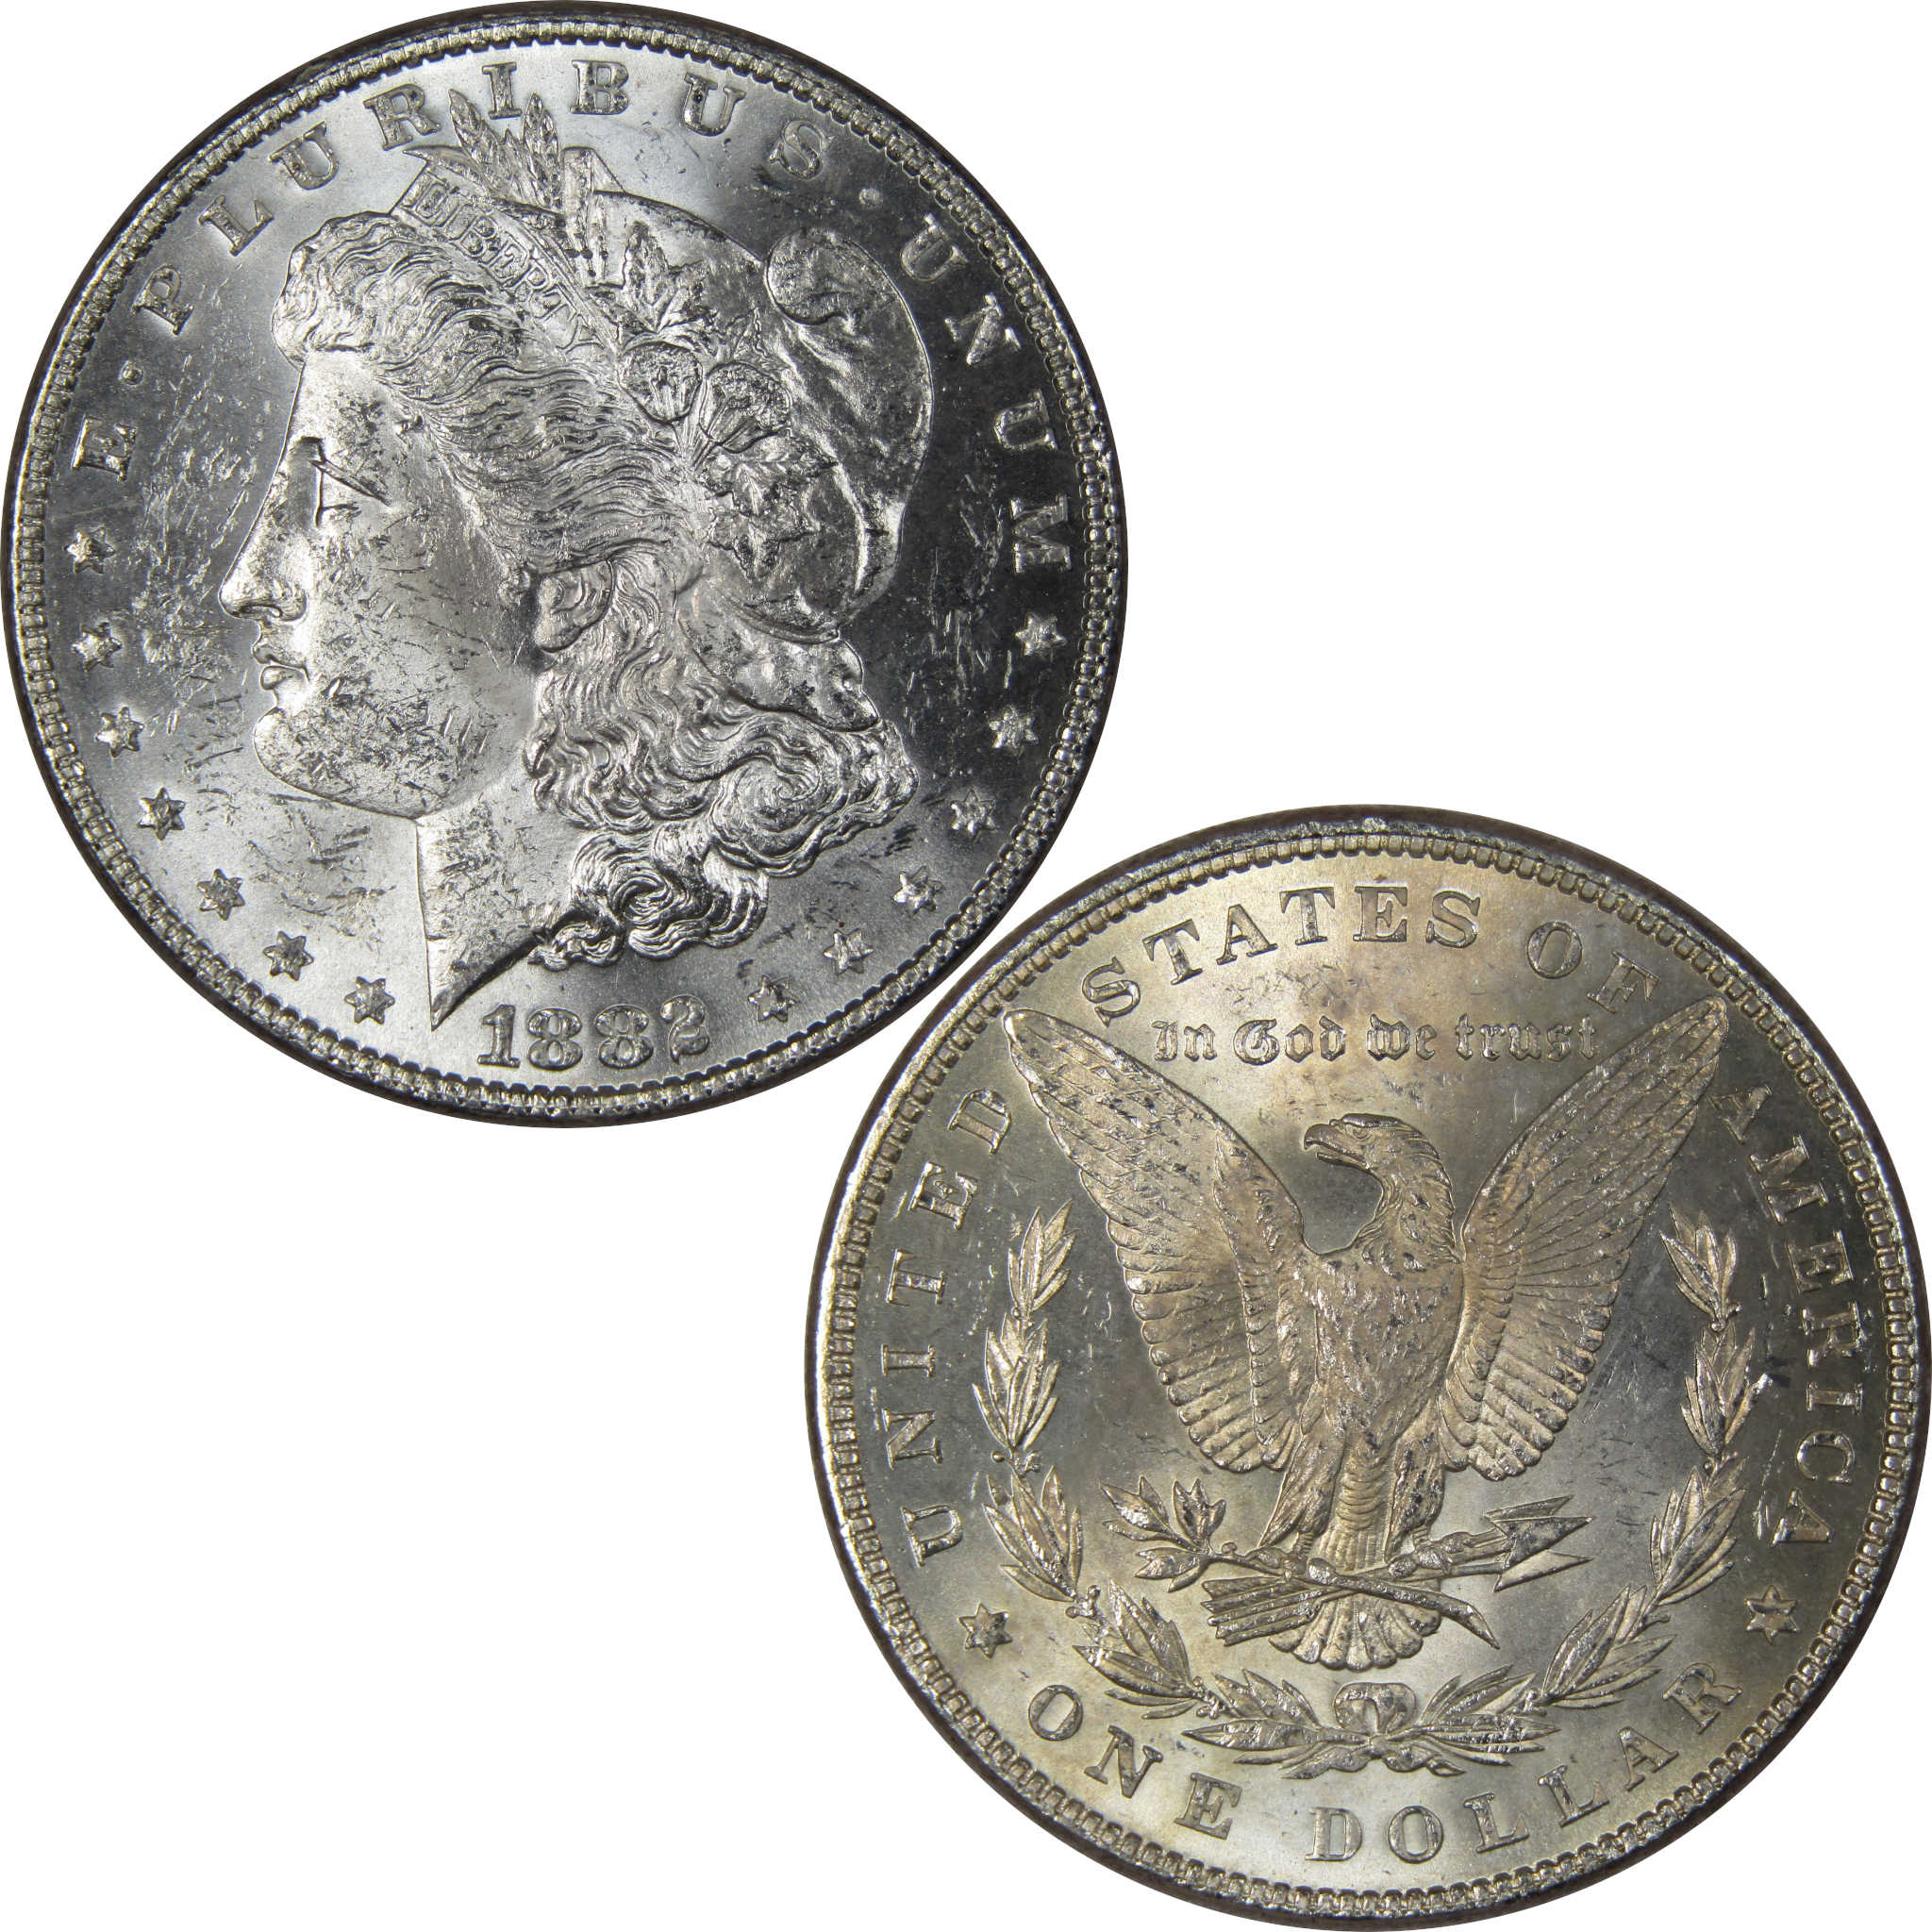 1882 Morgan Dollar BU Uncirculated Mint State 90% Silver SKU:IPC9716 - Morgan coin - Morgan silver dollar - Morgan silver dollar for sale - Profile Coins &amp; Collectibles